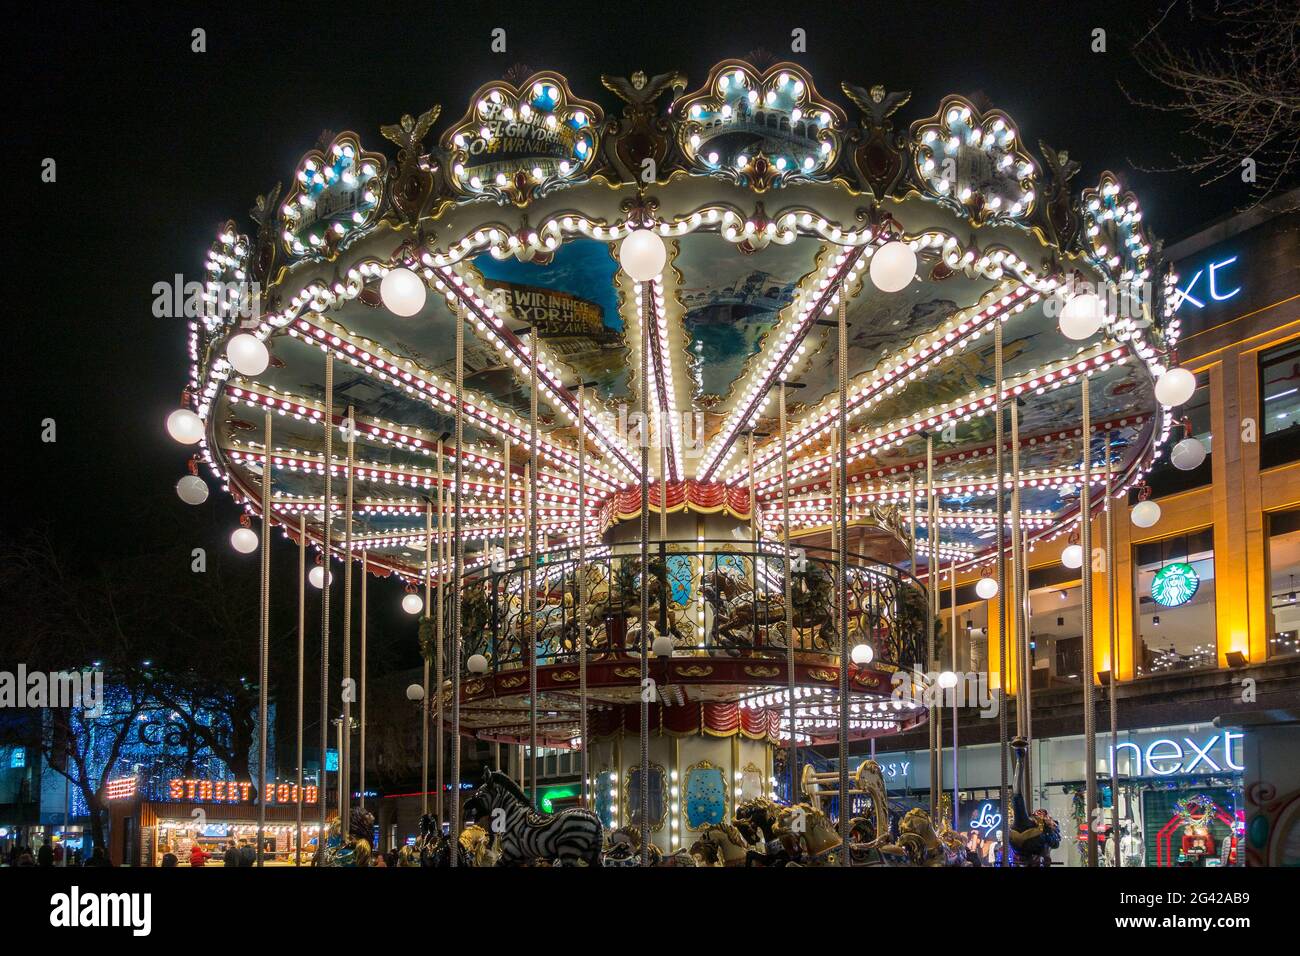 CARDIFF, WALES/UK - DECEMBER 15 : Carousel at Christmas in Cardiff Wales on December 15, 2018. Unidentified people Stock Photo